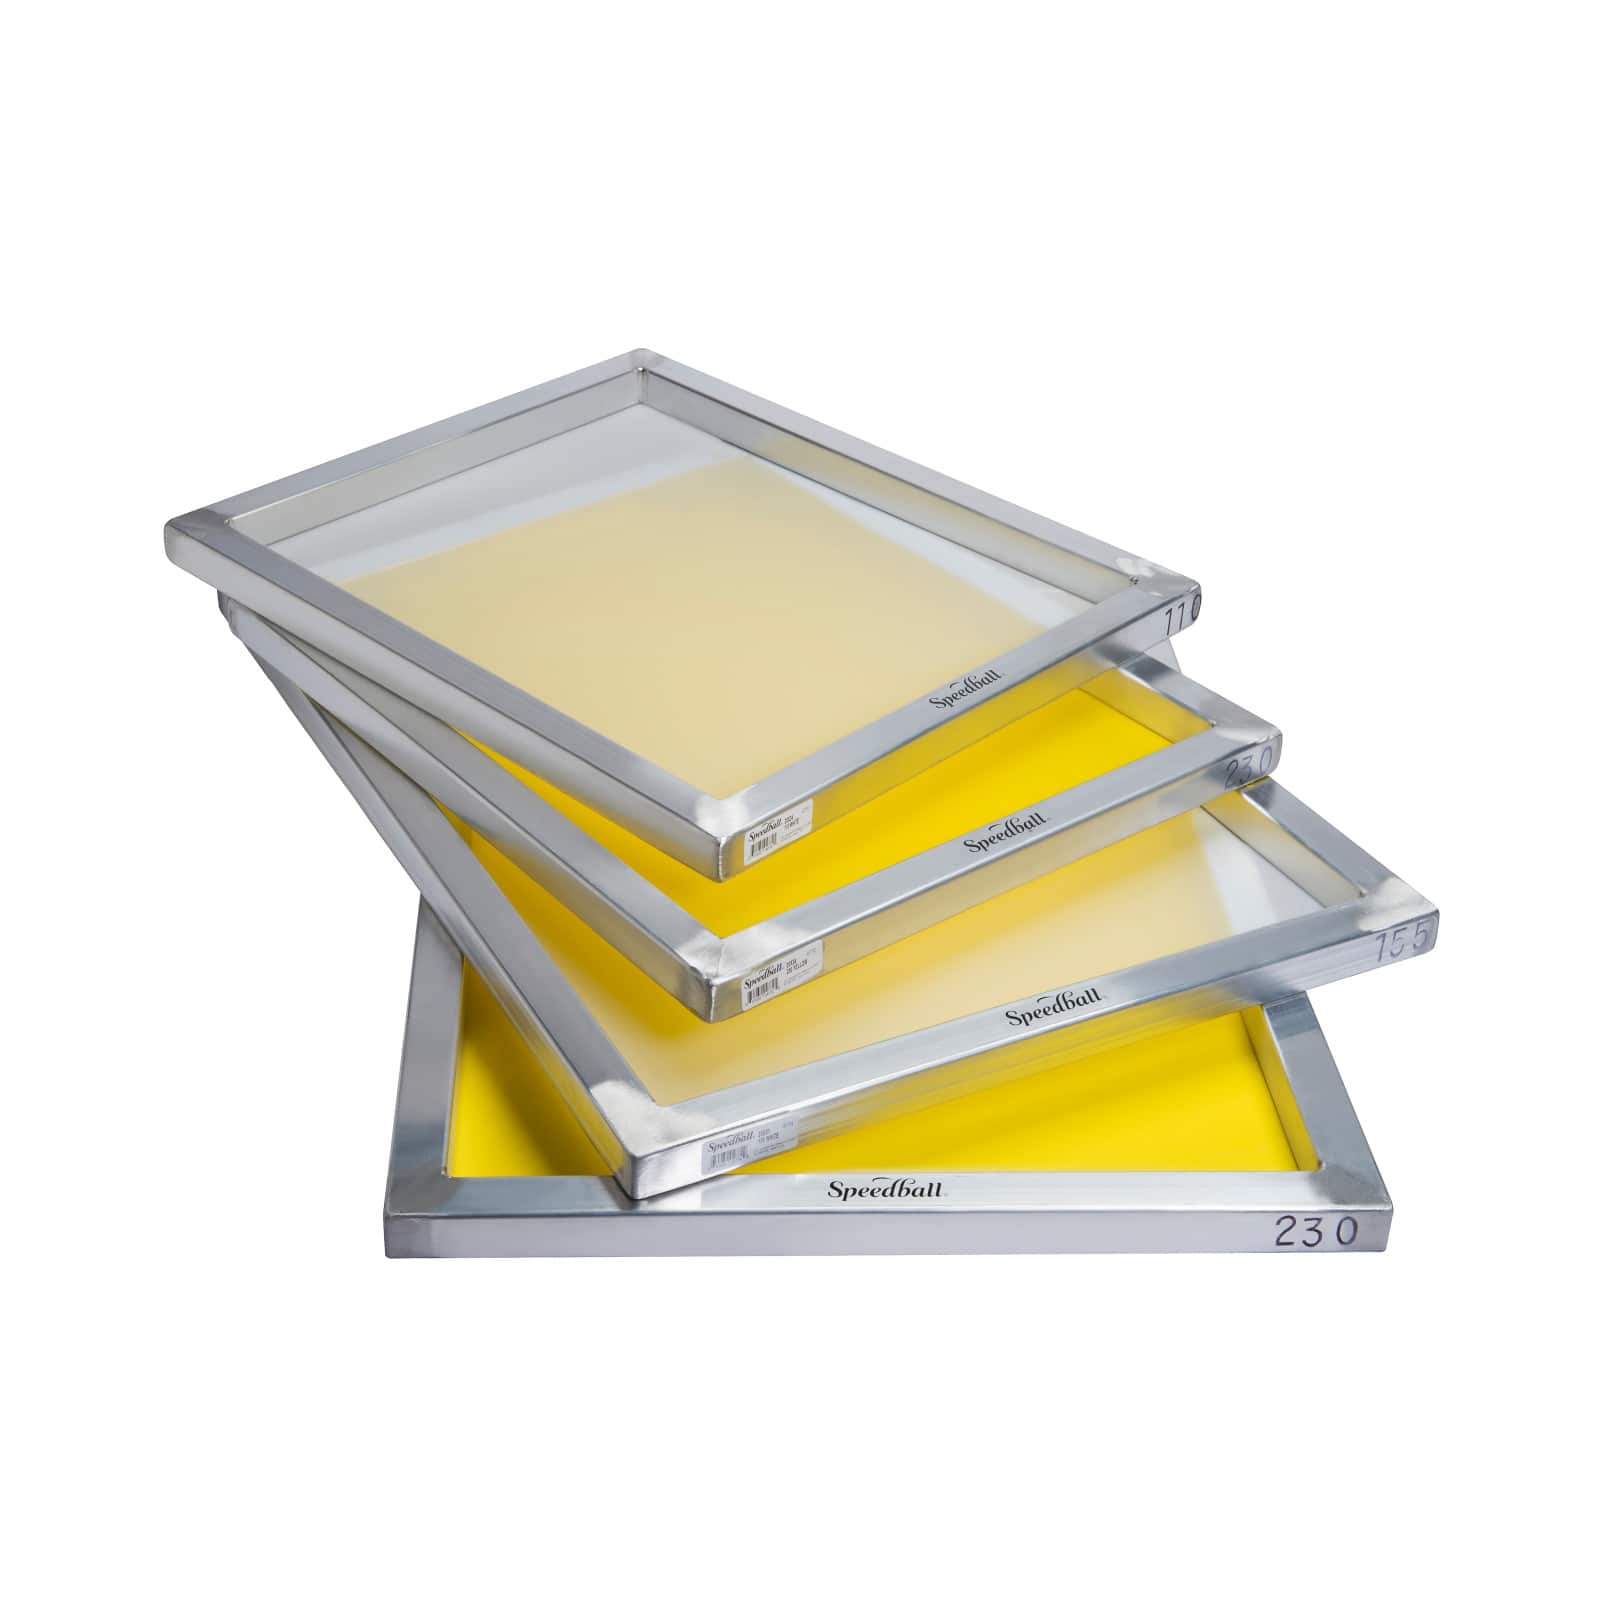 Aluminum Screen Printing Frame 20x24 with 230 Yellow Mesh